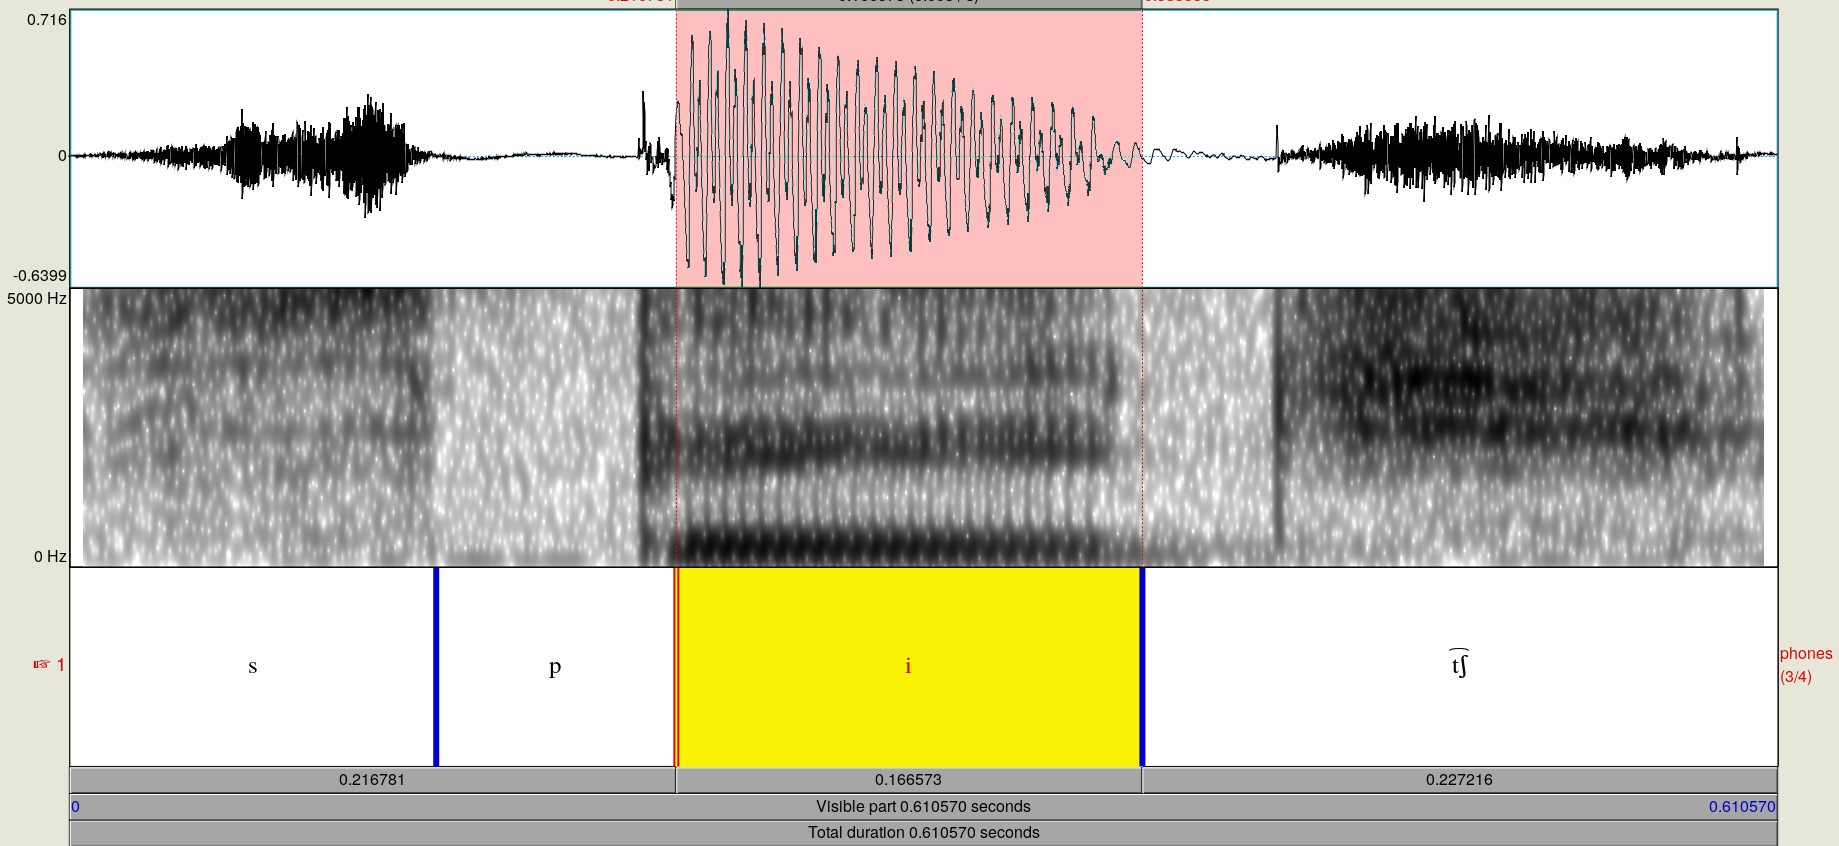 Figure 5: Annotated spectrogram and waveform of me saying "speech"